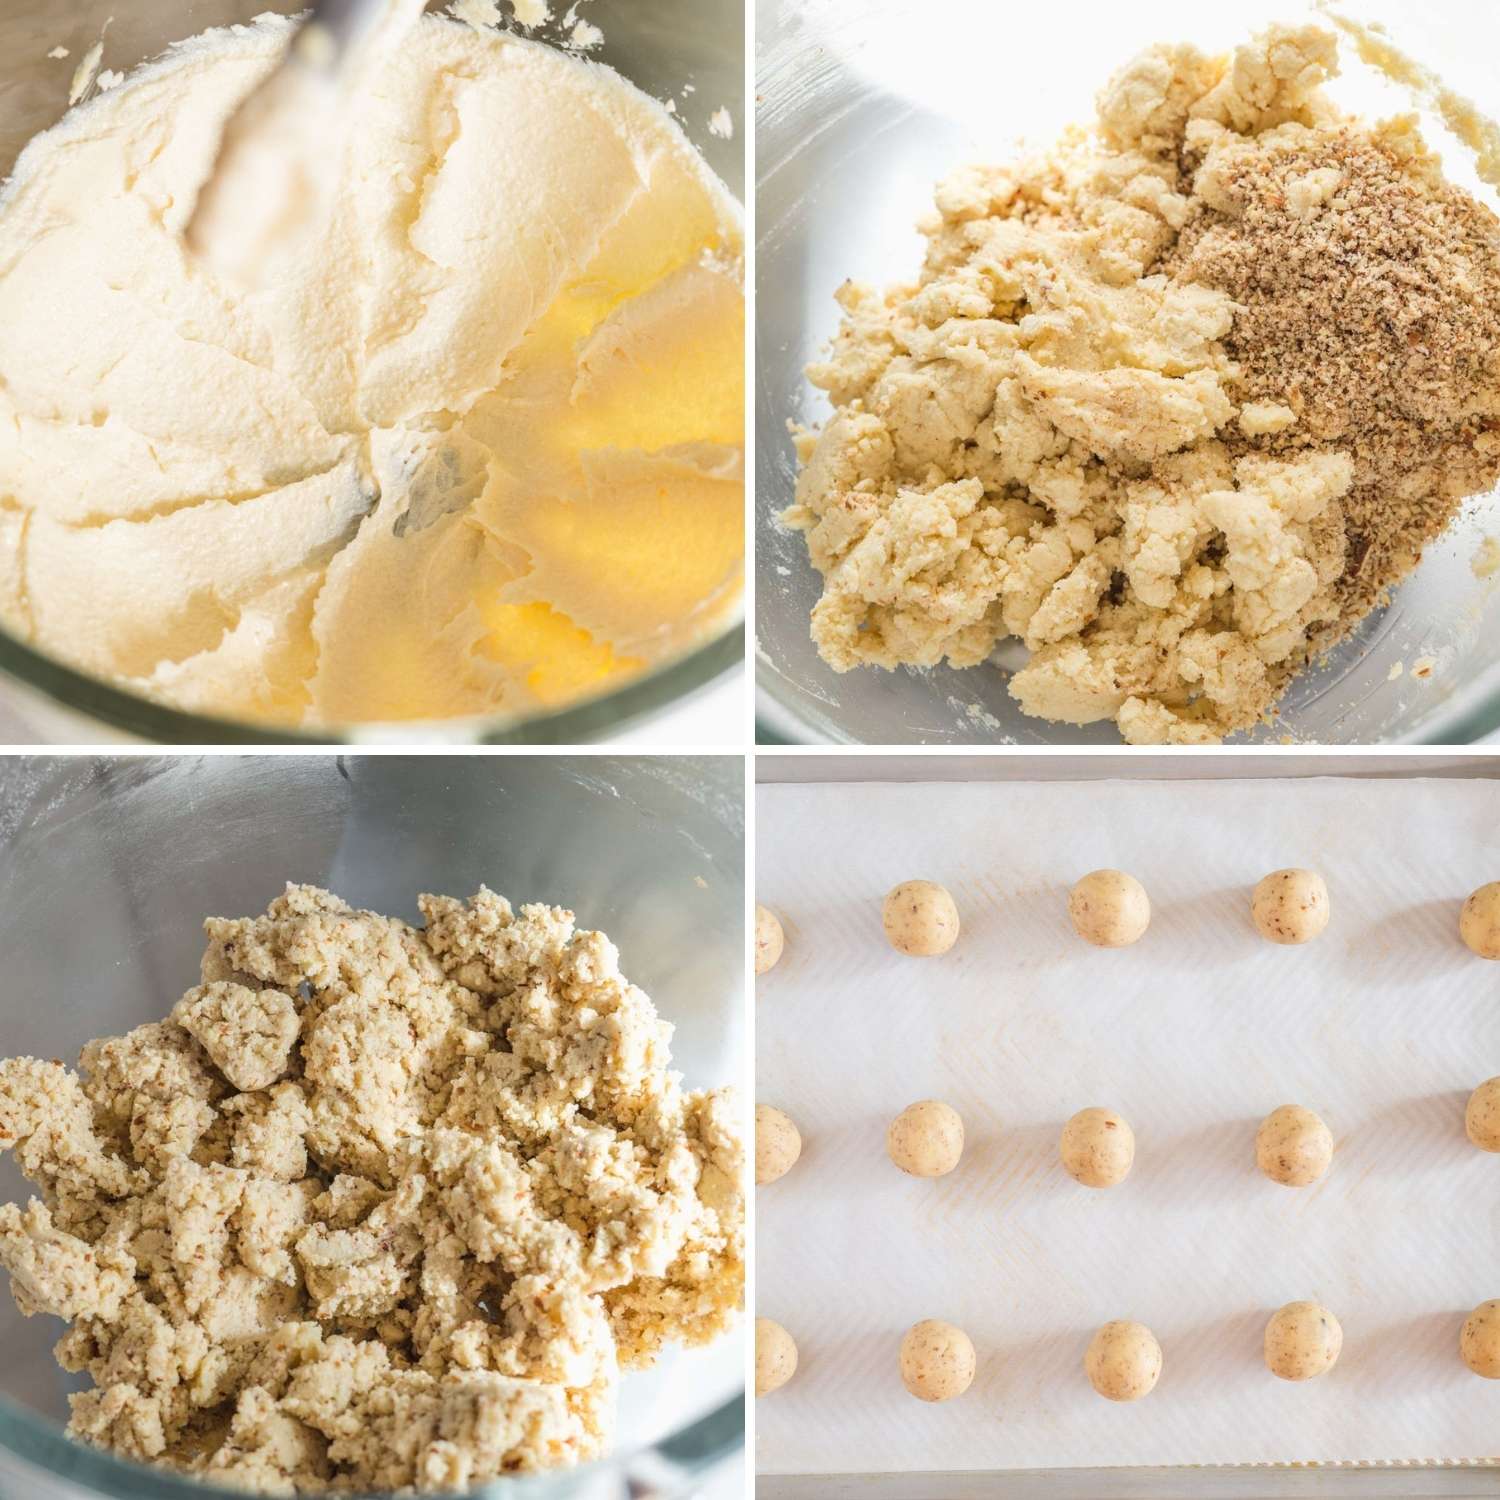 photo collage showing 4 steps needed to make pecan sandies dough